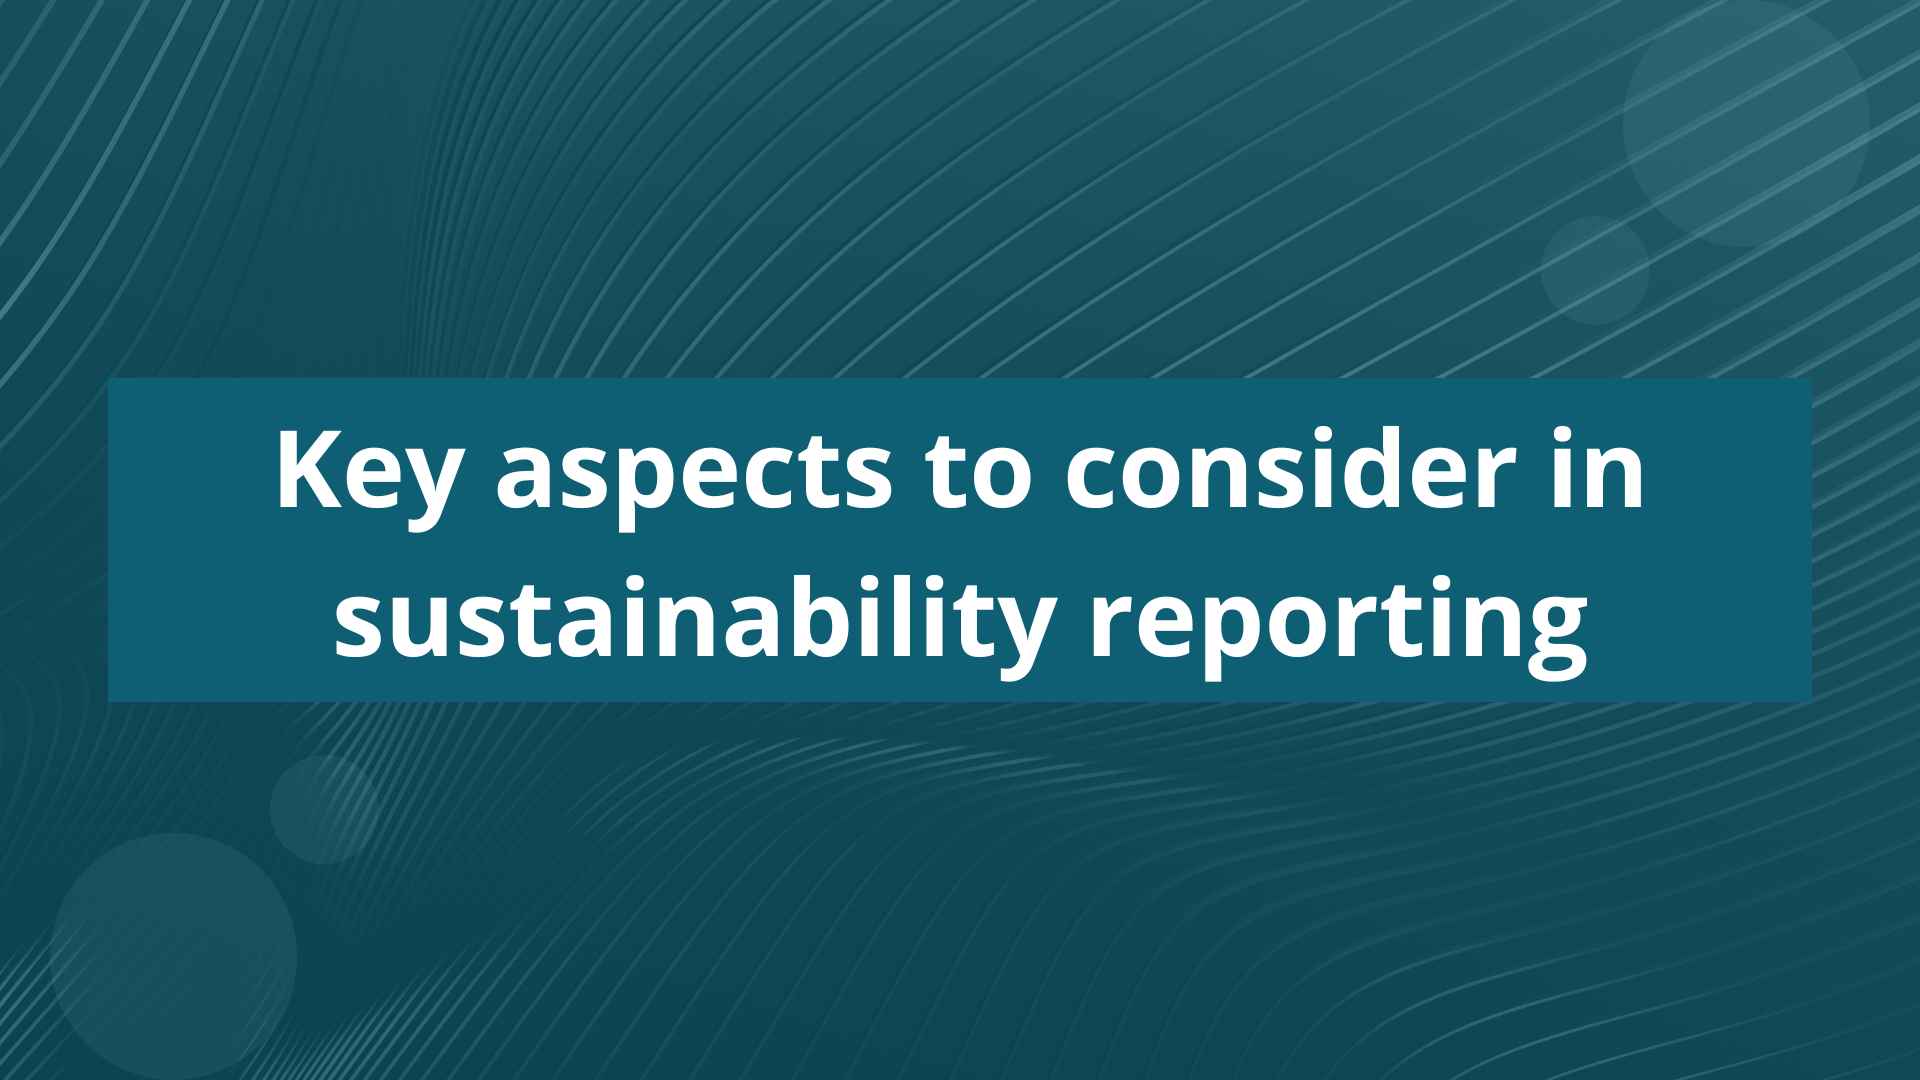 Key aspects to consider in sustainability reporting